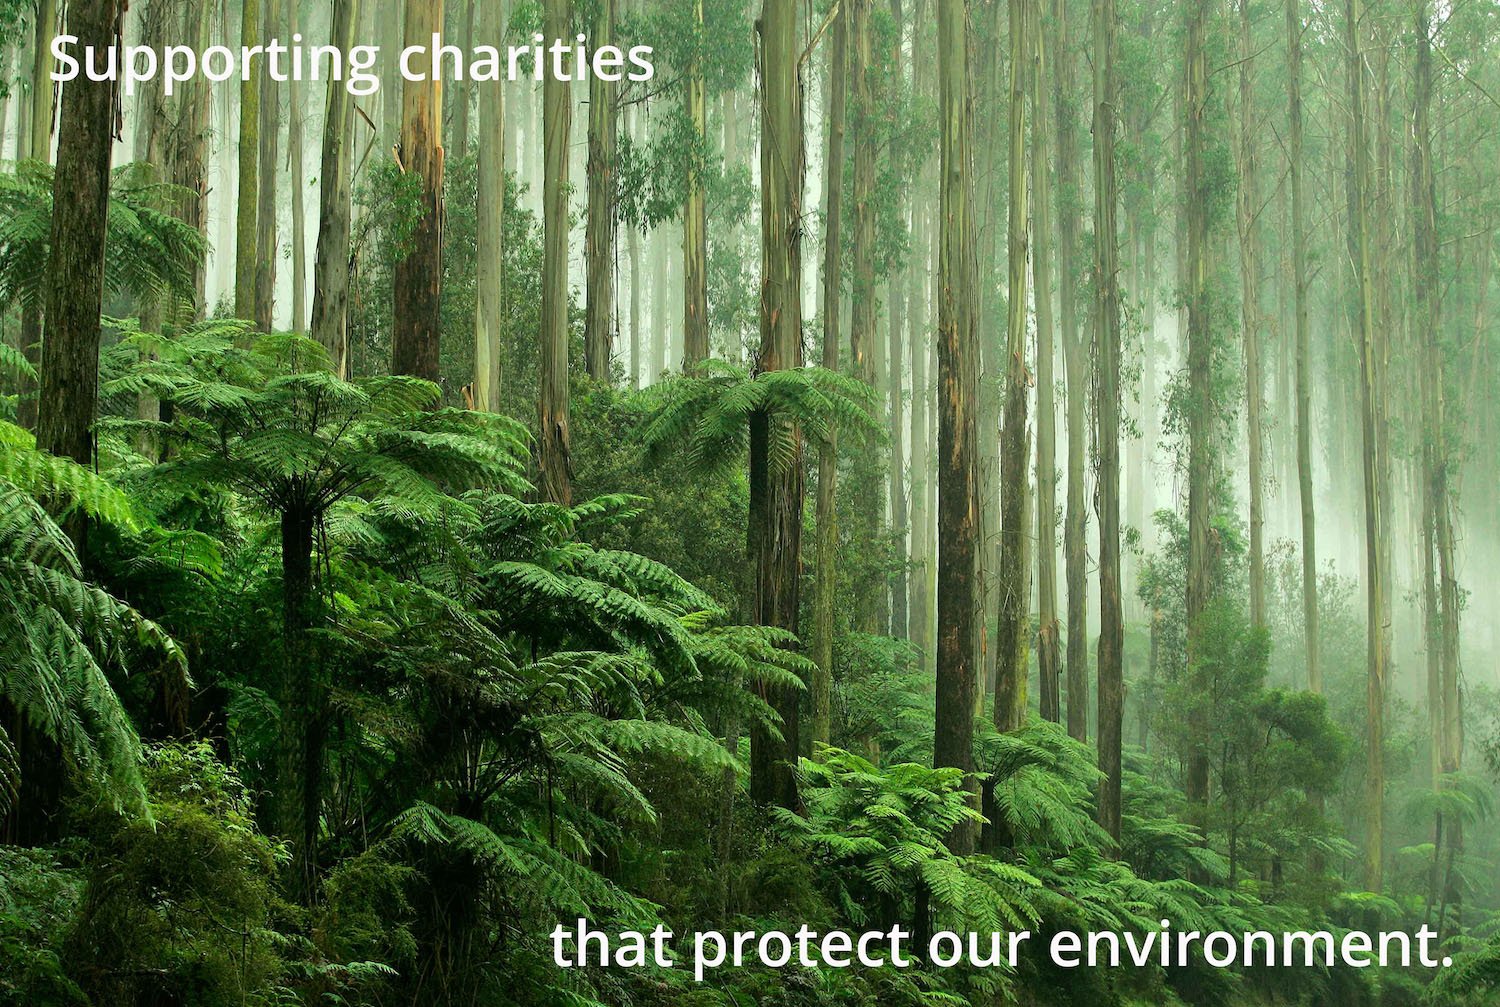 Supporting charities that protect our environment